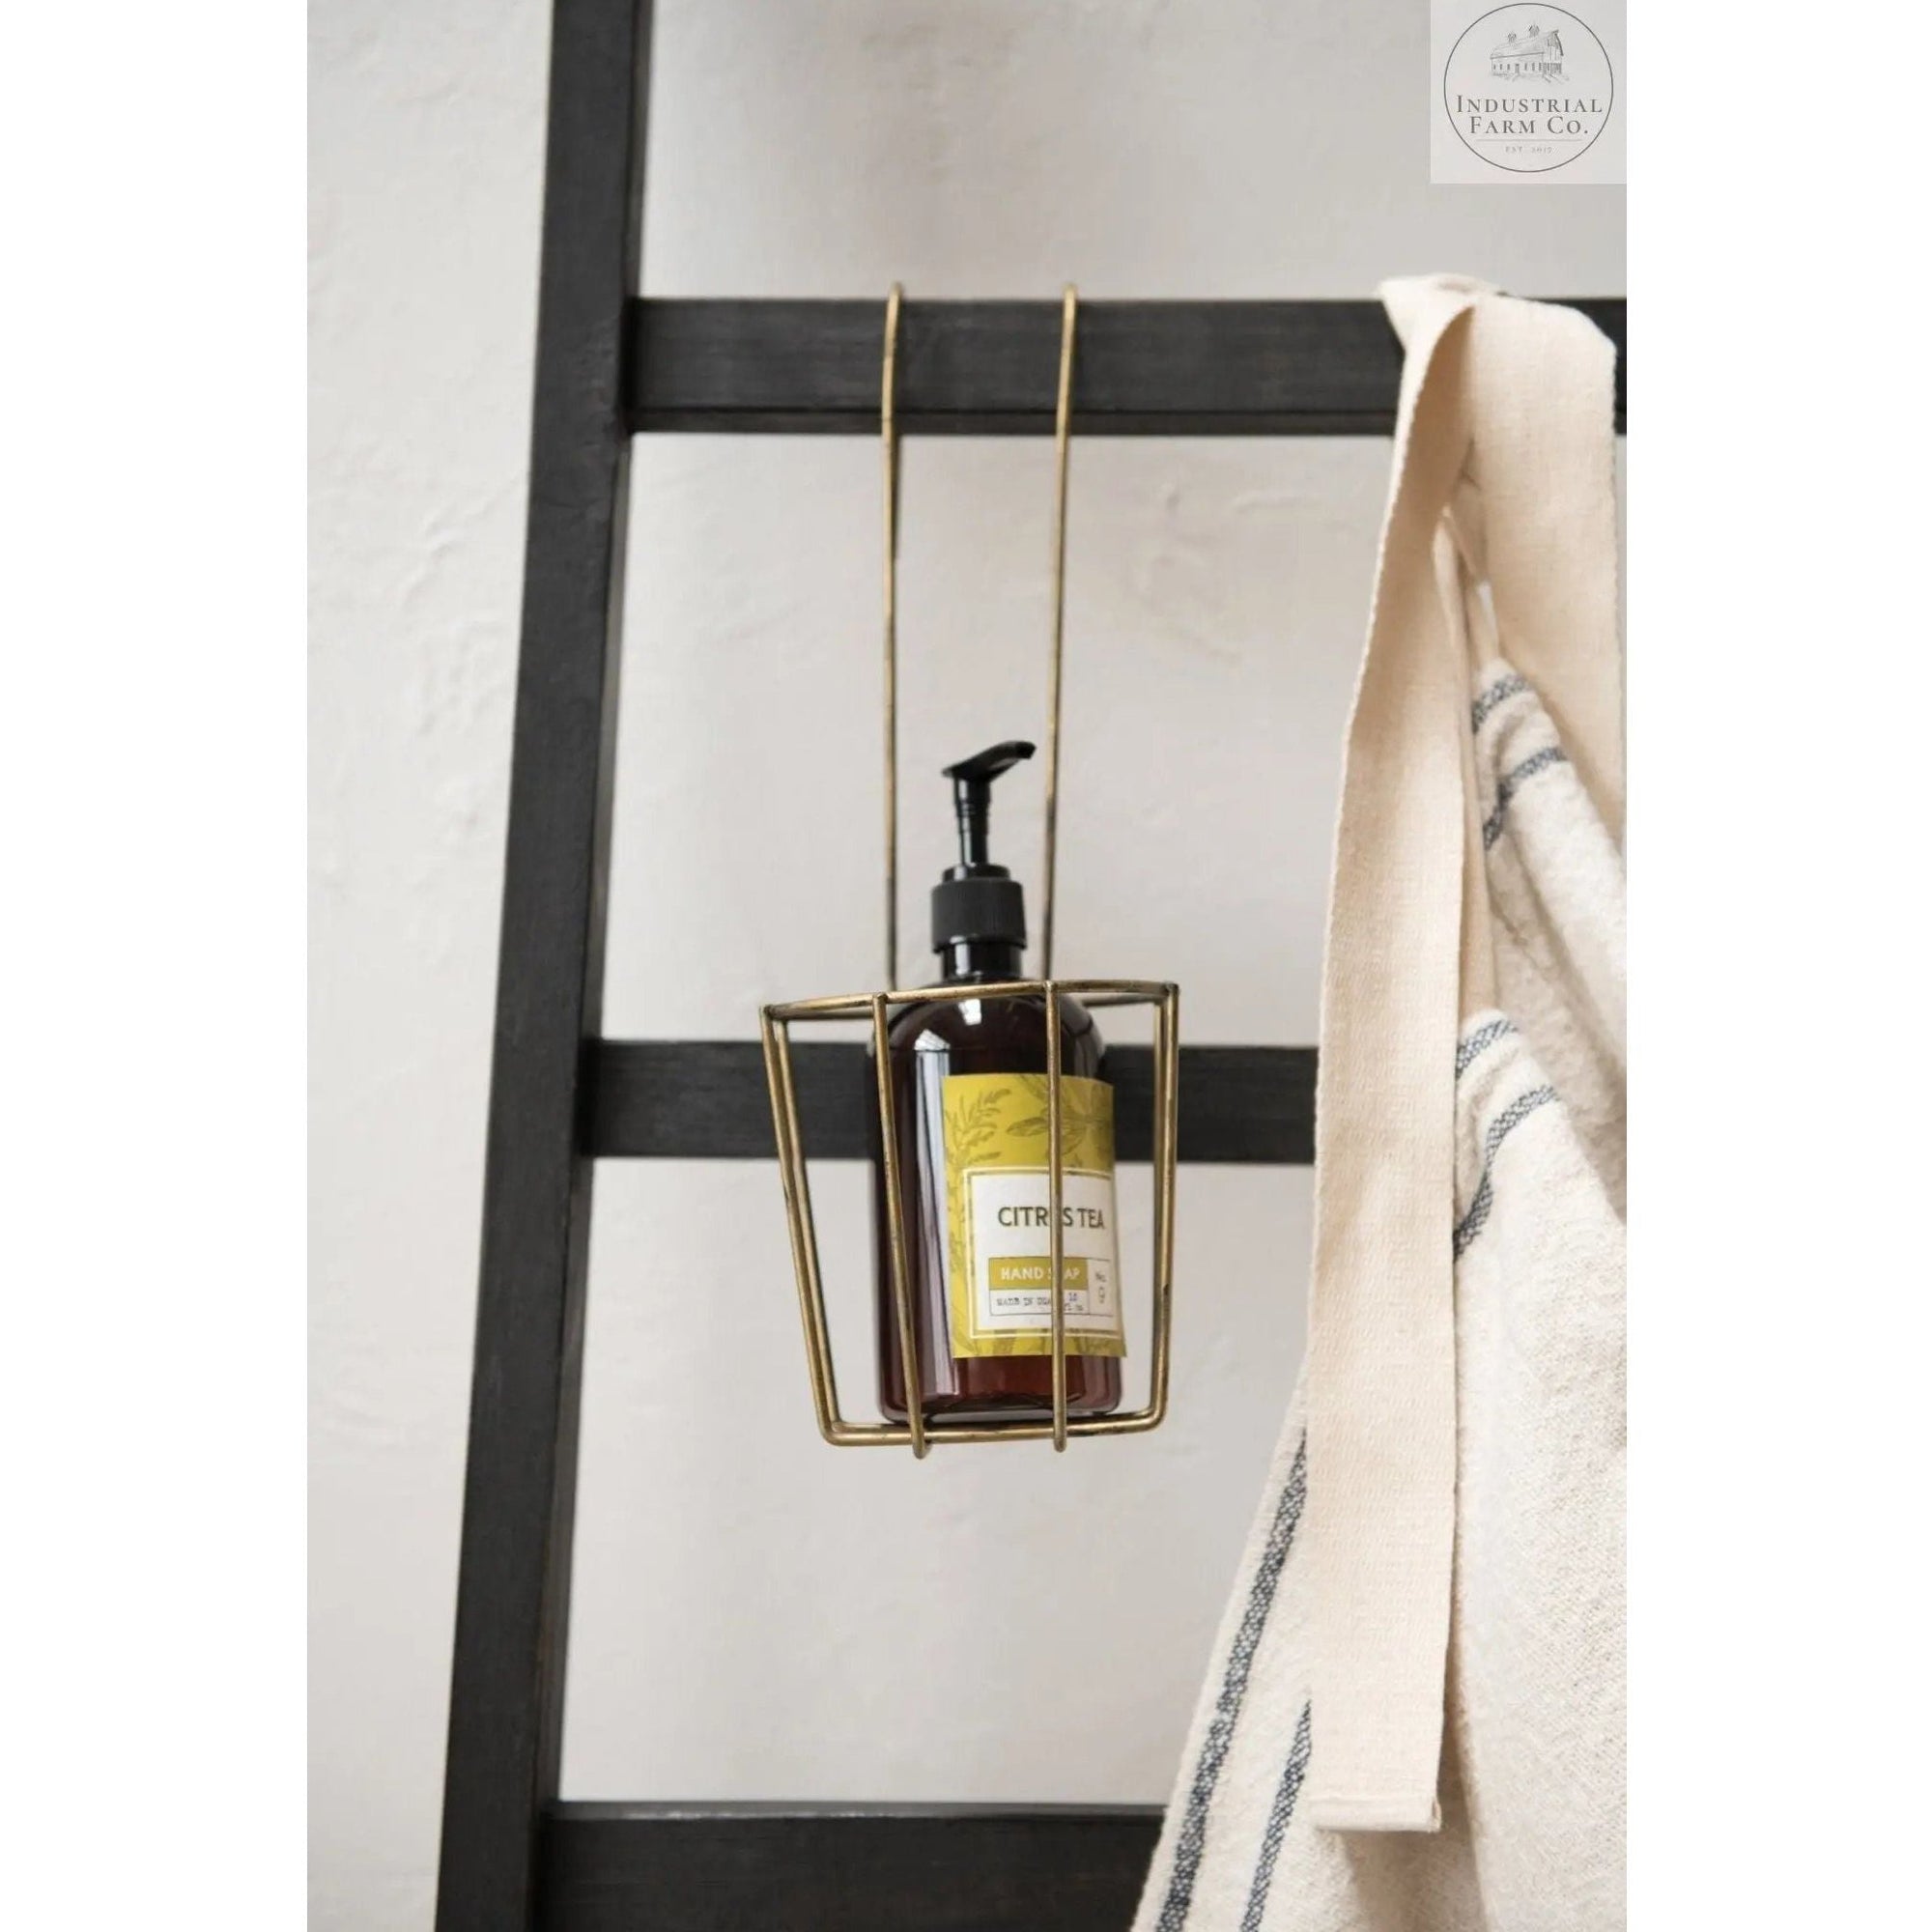 Metal Hook with Storage Cup     | Industrial Farm Co